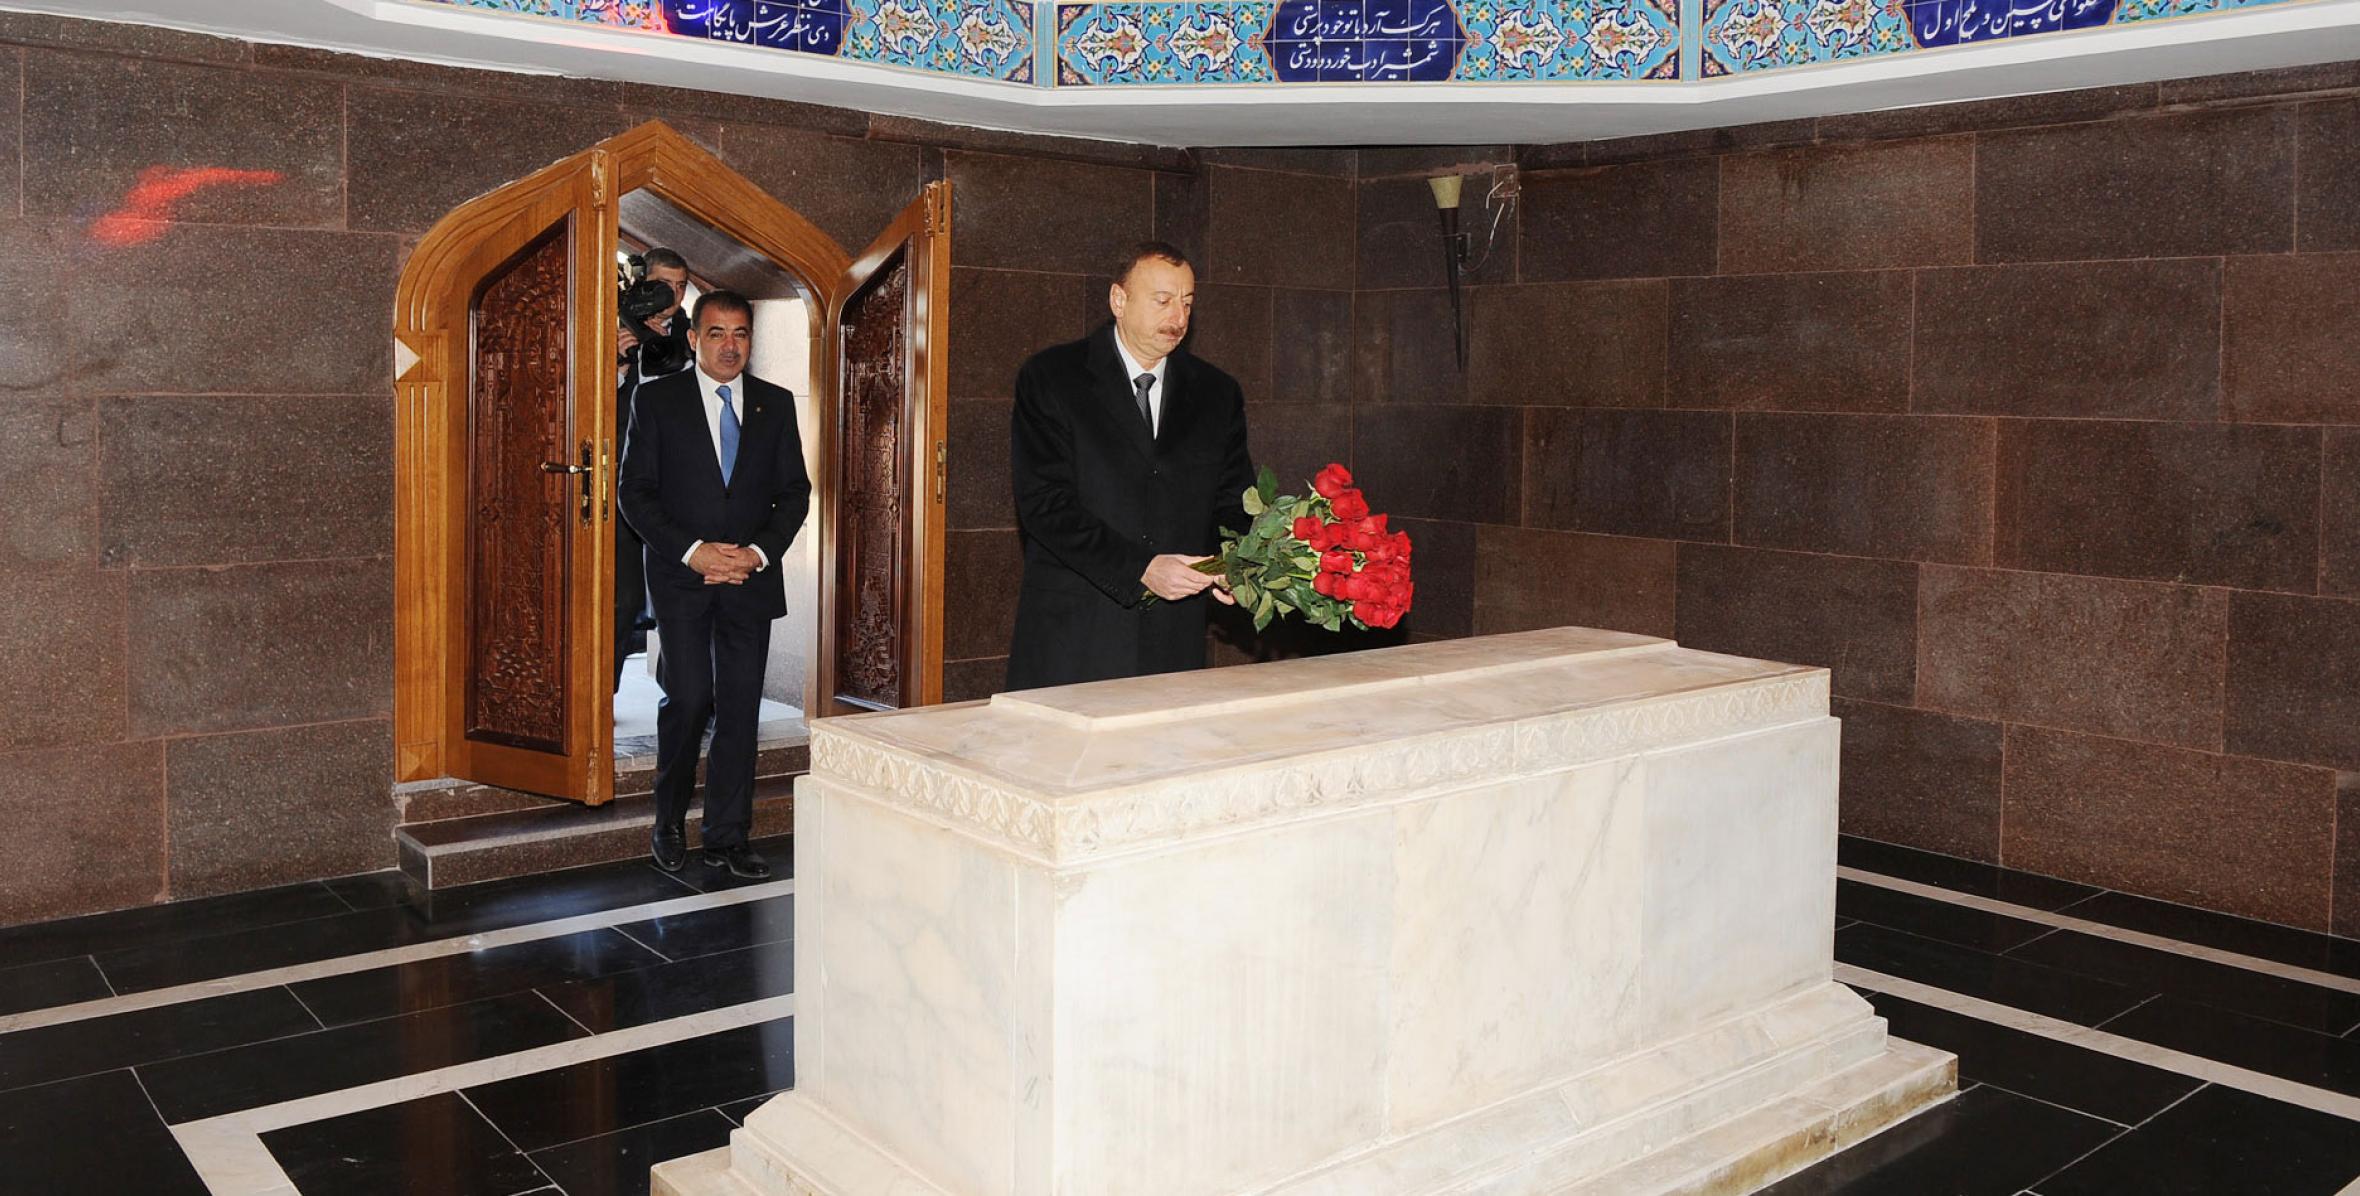 Ilham Aliyev studied the course of reconstruction work carried out around the Mausoleum of Great Nizami in Ganja